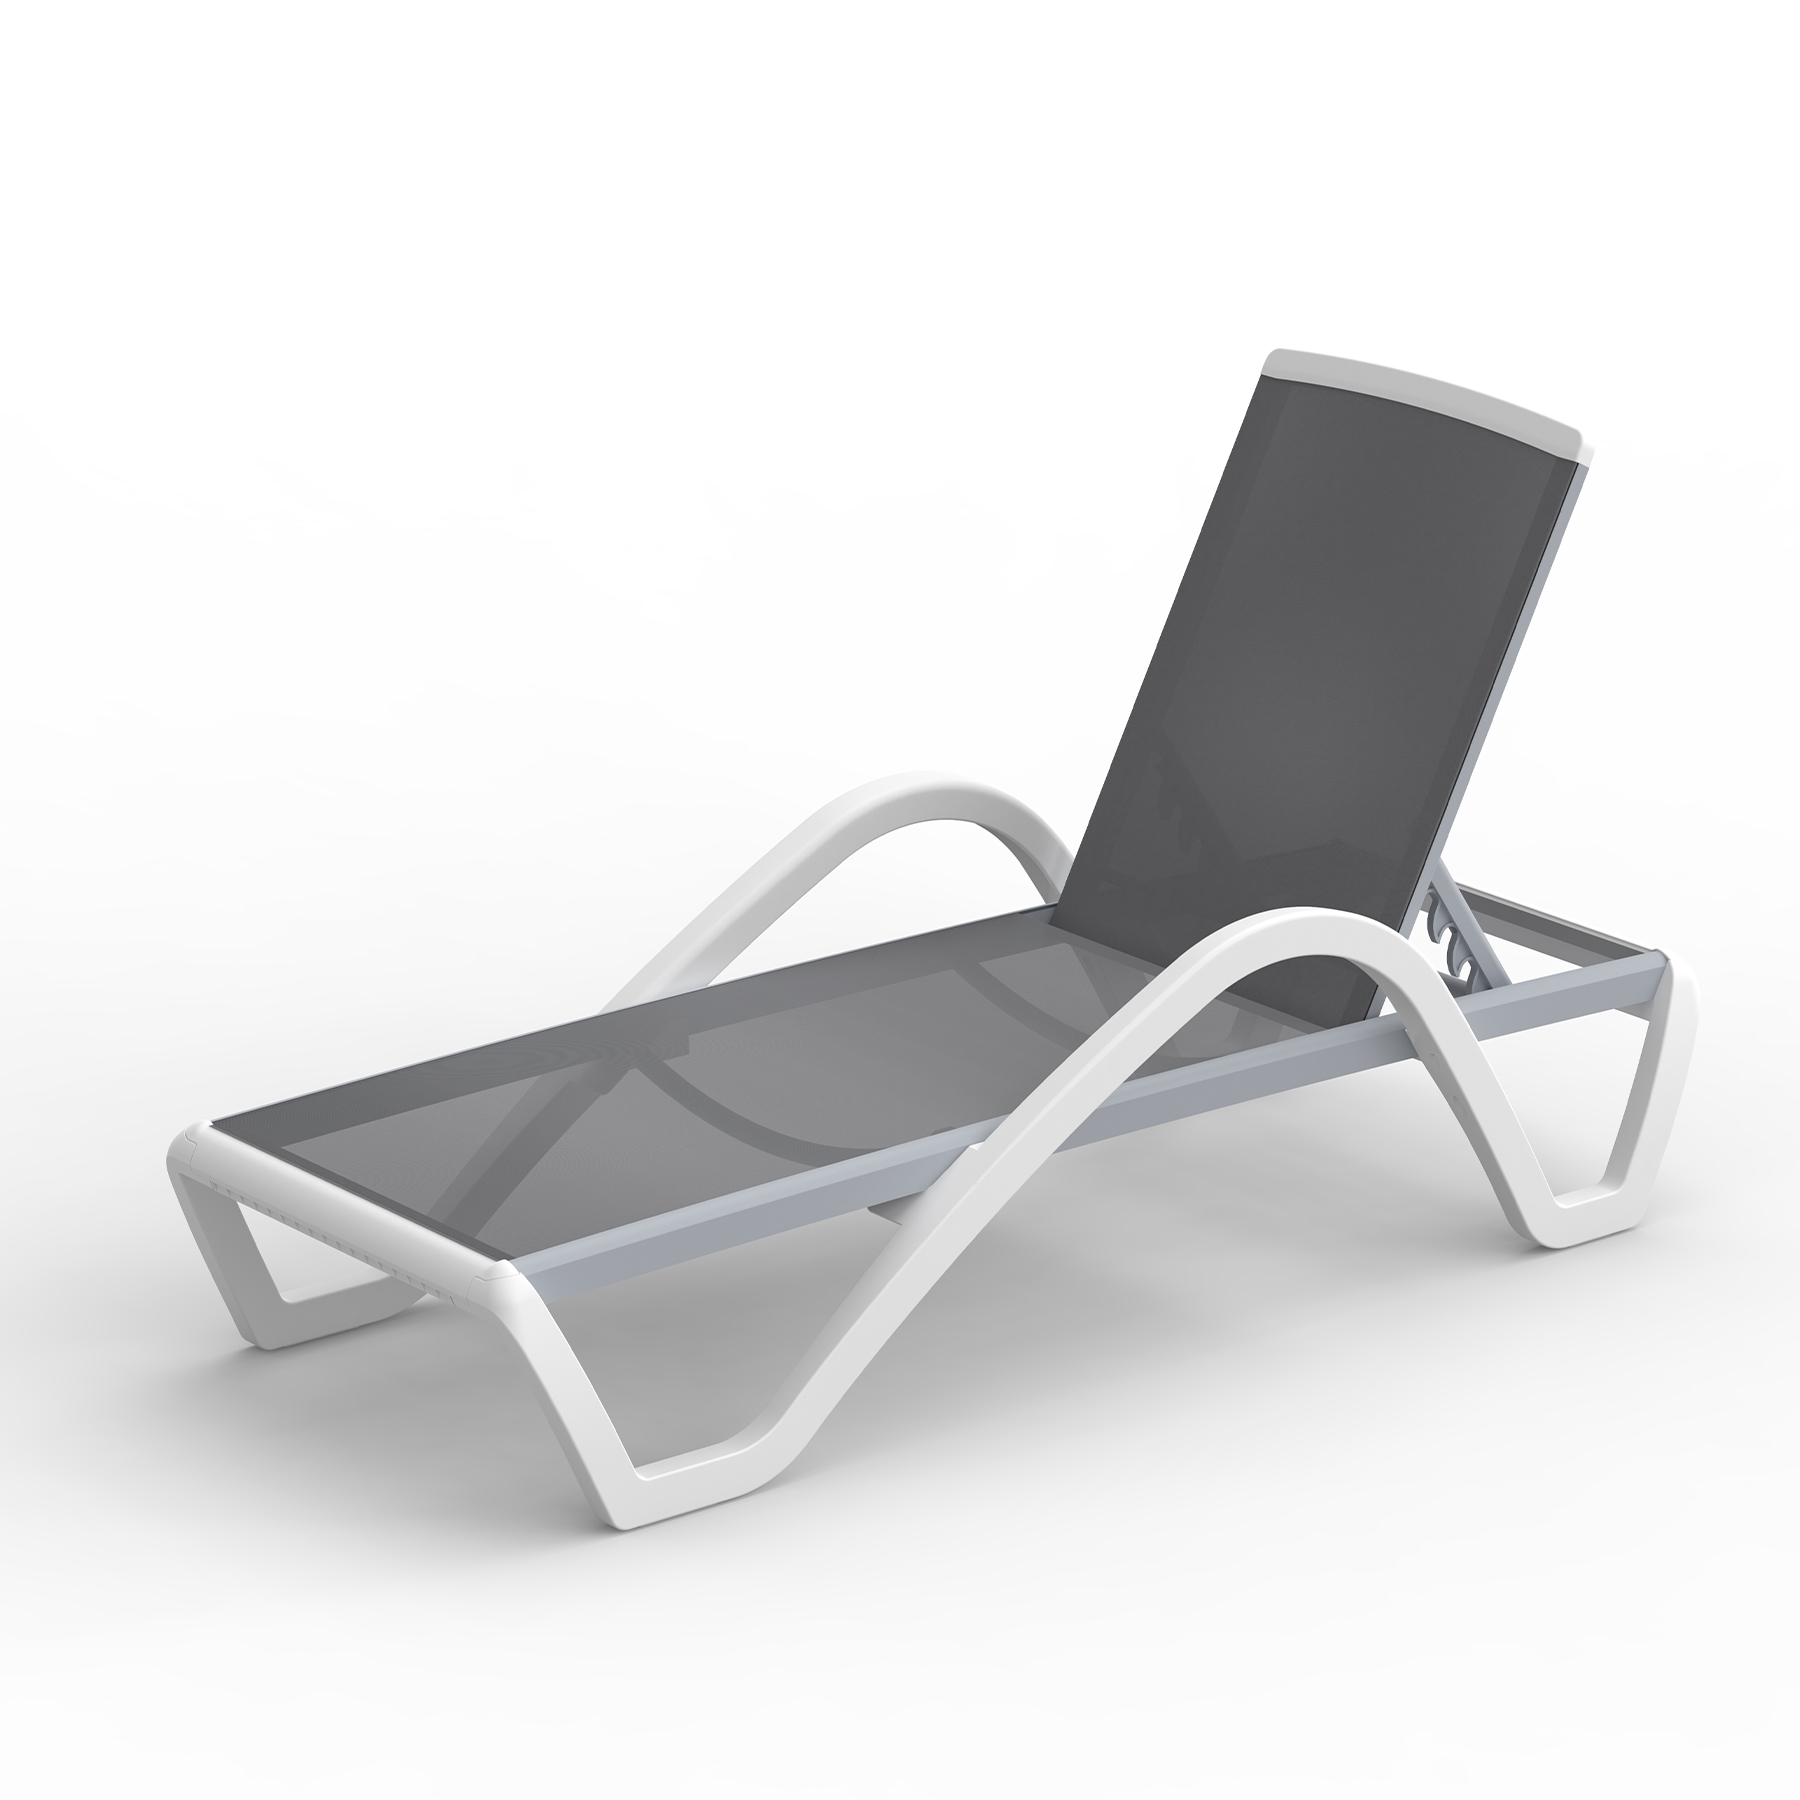 Mydepot Outdoor Aluminum Patio Chair, Domi Chaise Lounge, Adjustable Backrest, Polypropylene, Beach Chair - image 1 of 2